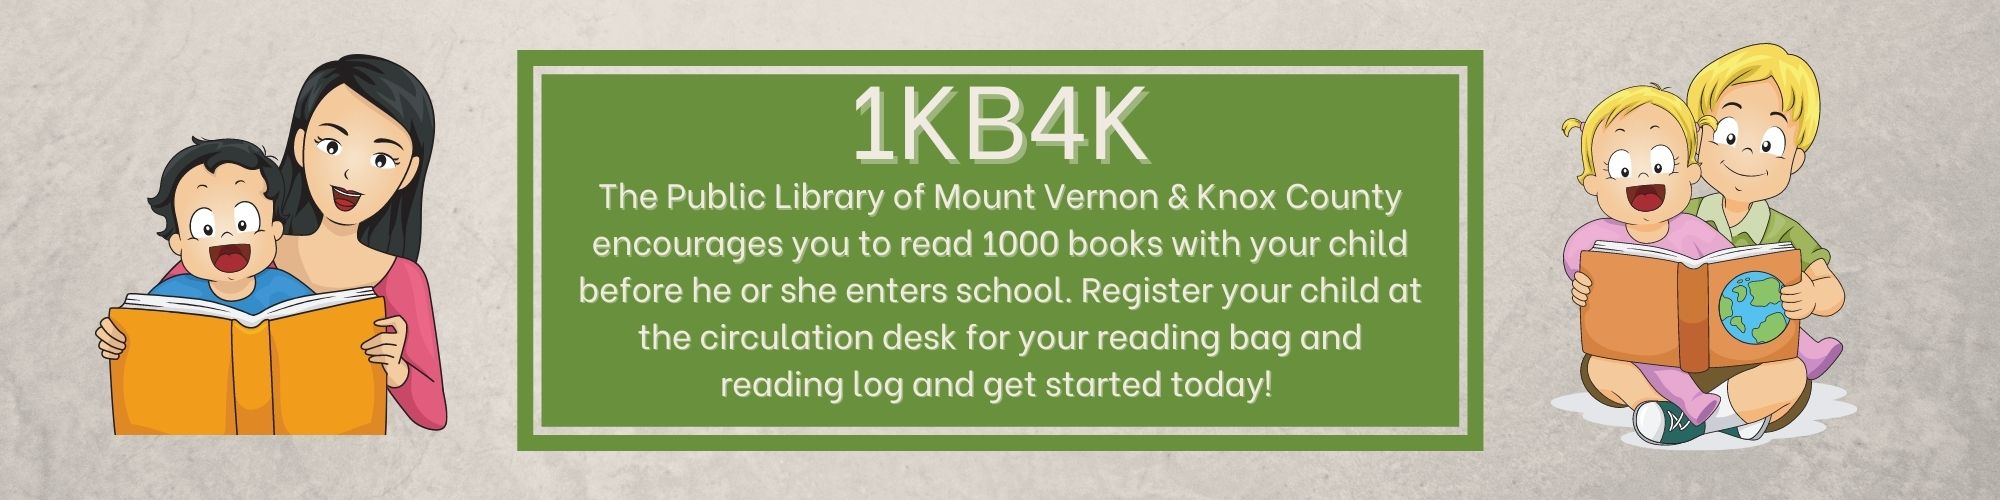 1kb4k. The Public Library of Mount Vernon and Knox County encourages you to read 1000 books with your child before he or she enters school. Register your child at the circulation desk for your reading bag and readinglog and get started today!